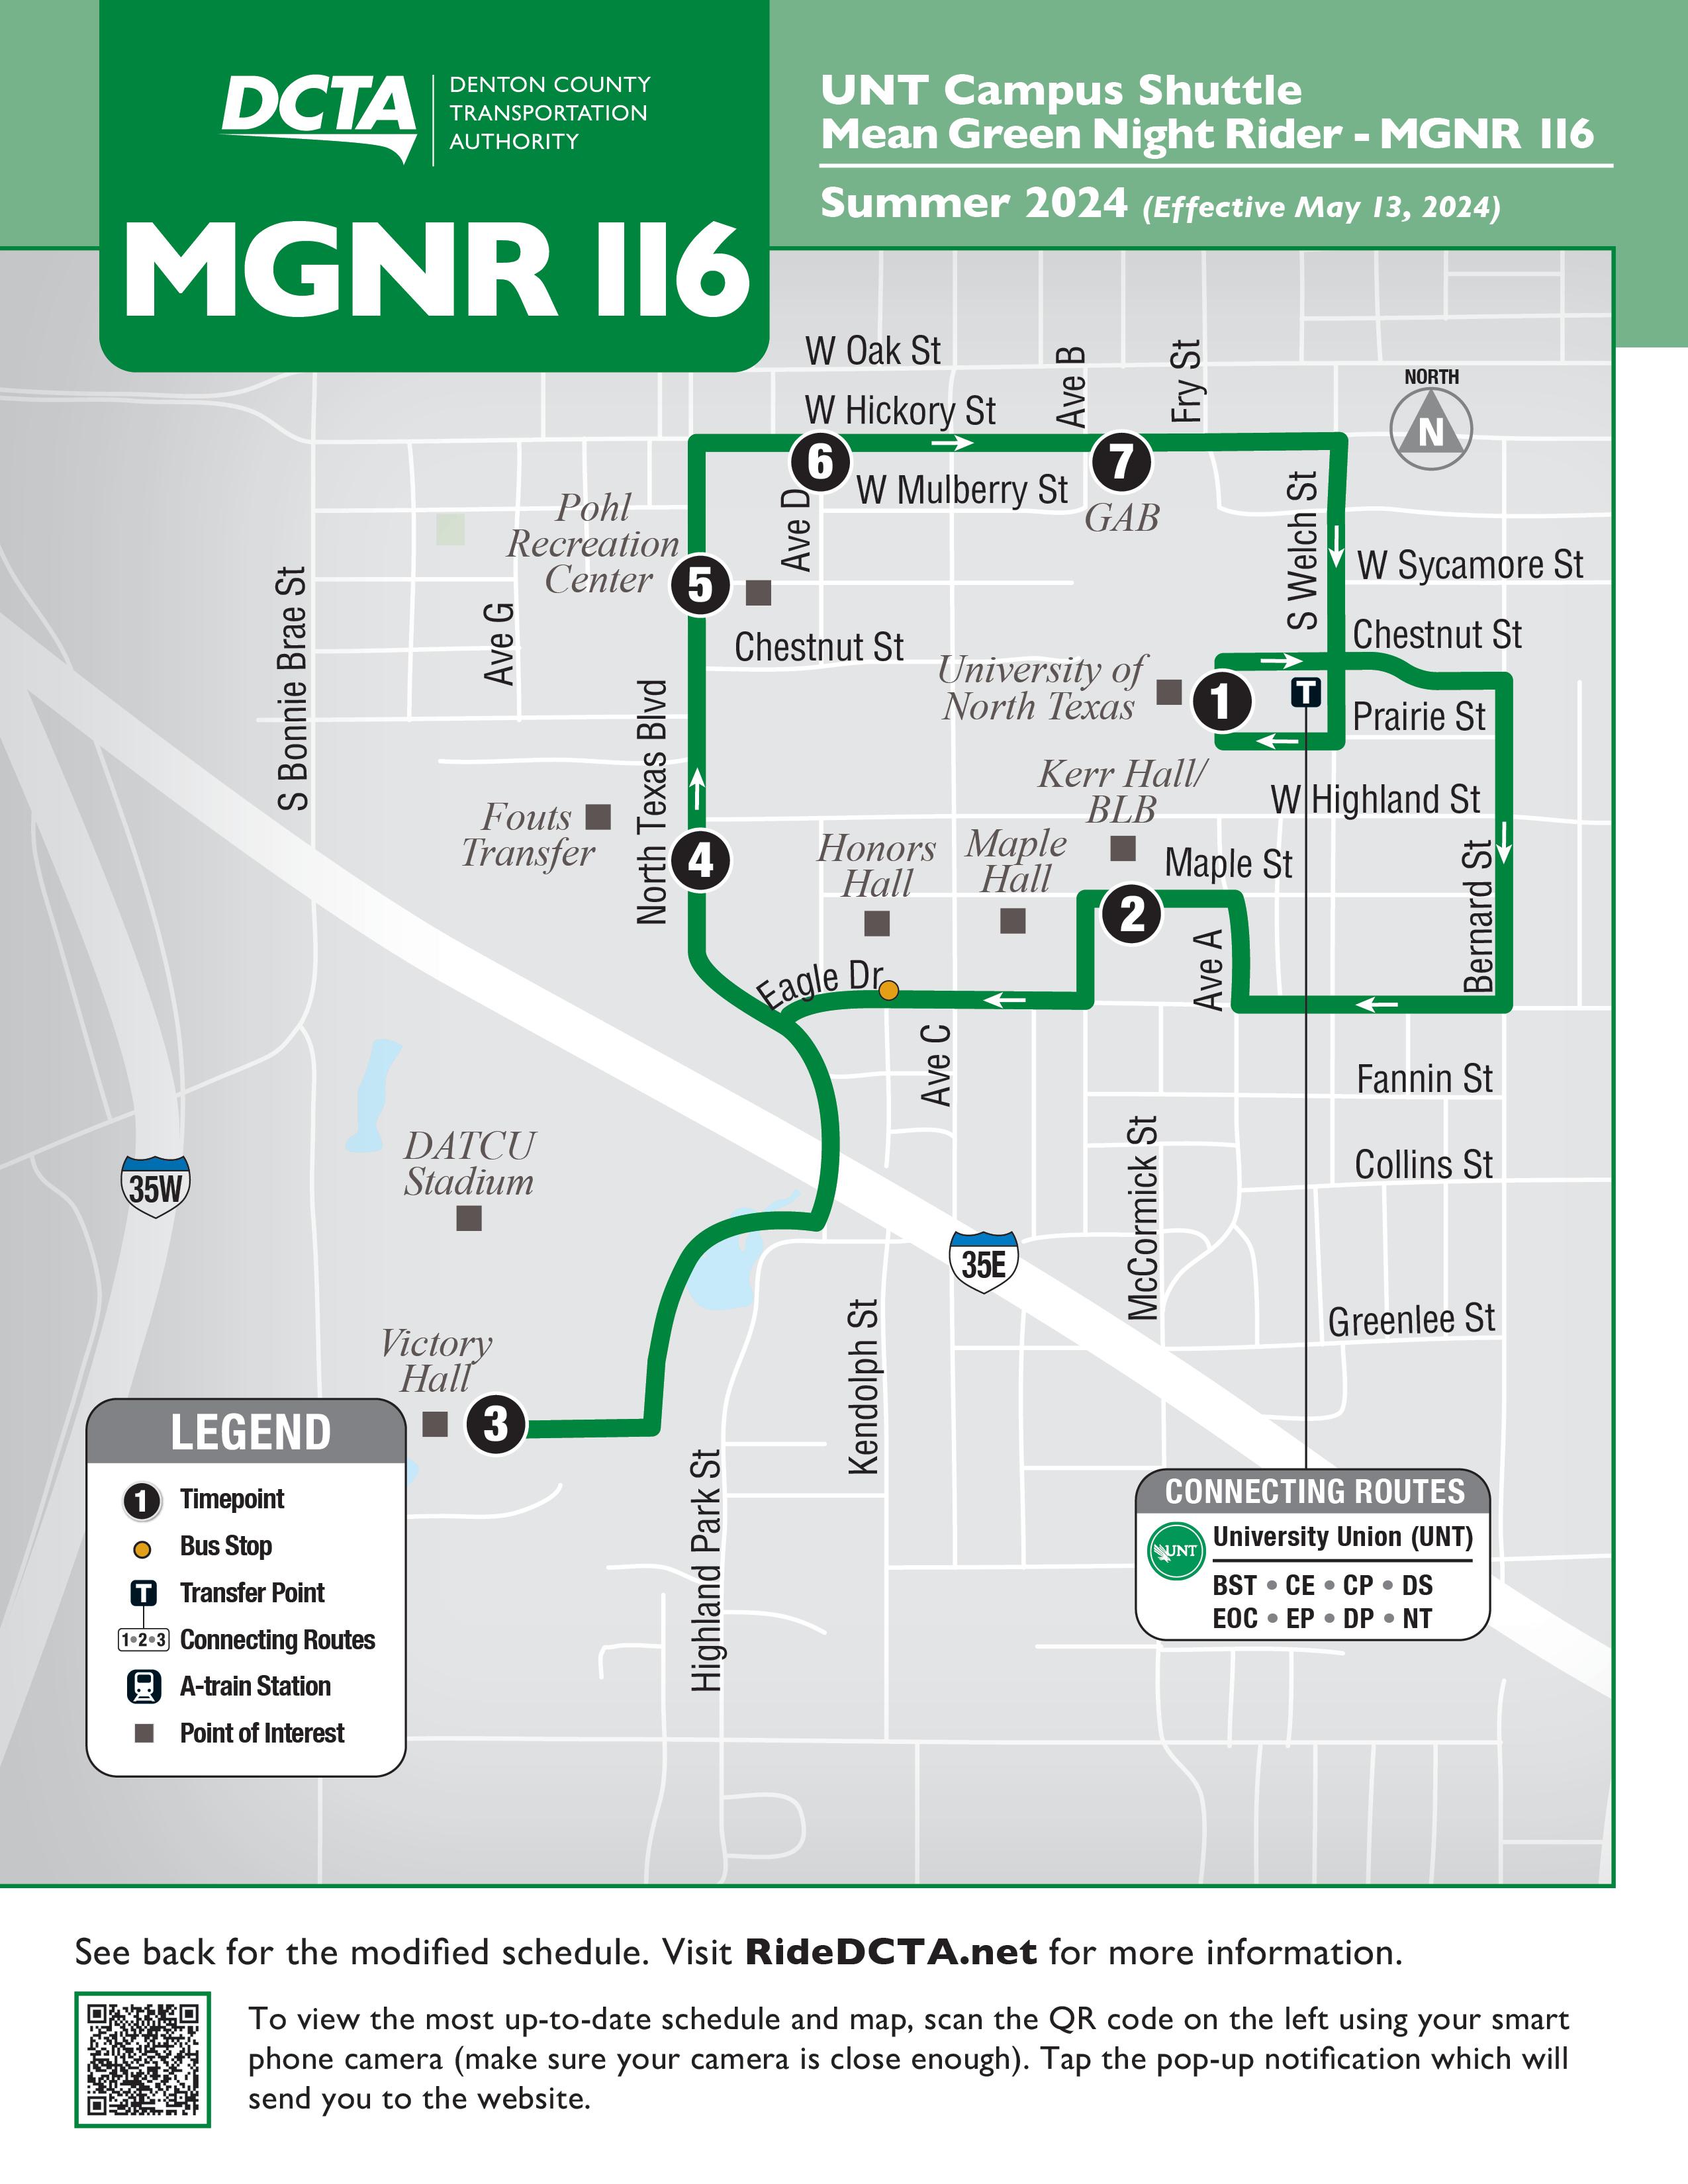 MGNR 116 Summer Route FY24 Map